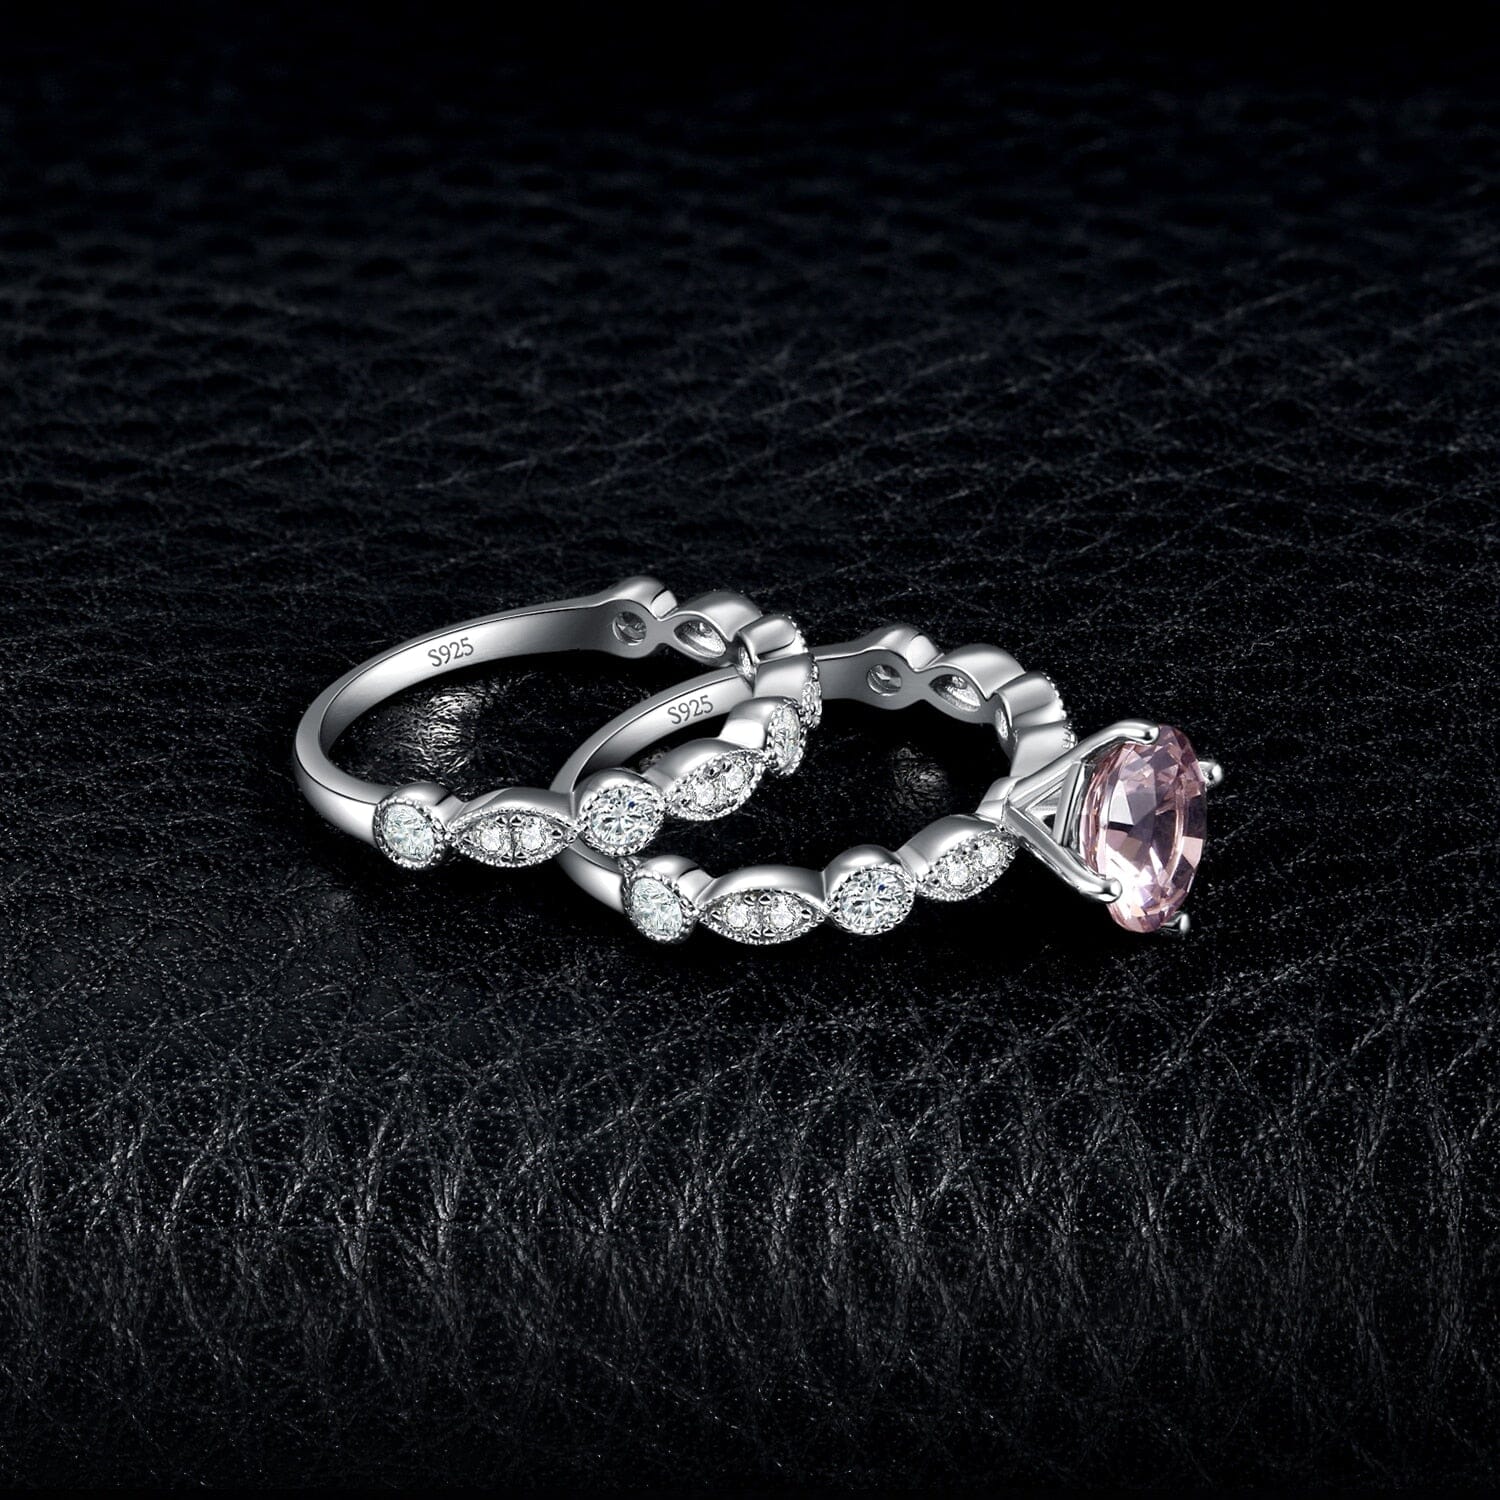 2 Pc Infinity 3ct Created Pink Morganite Ring - 925 Sterling SilverRing